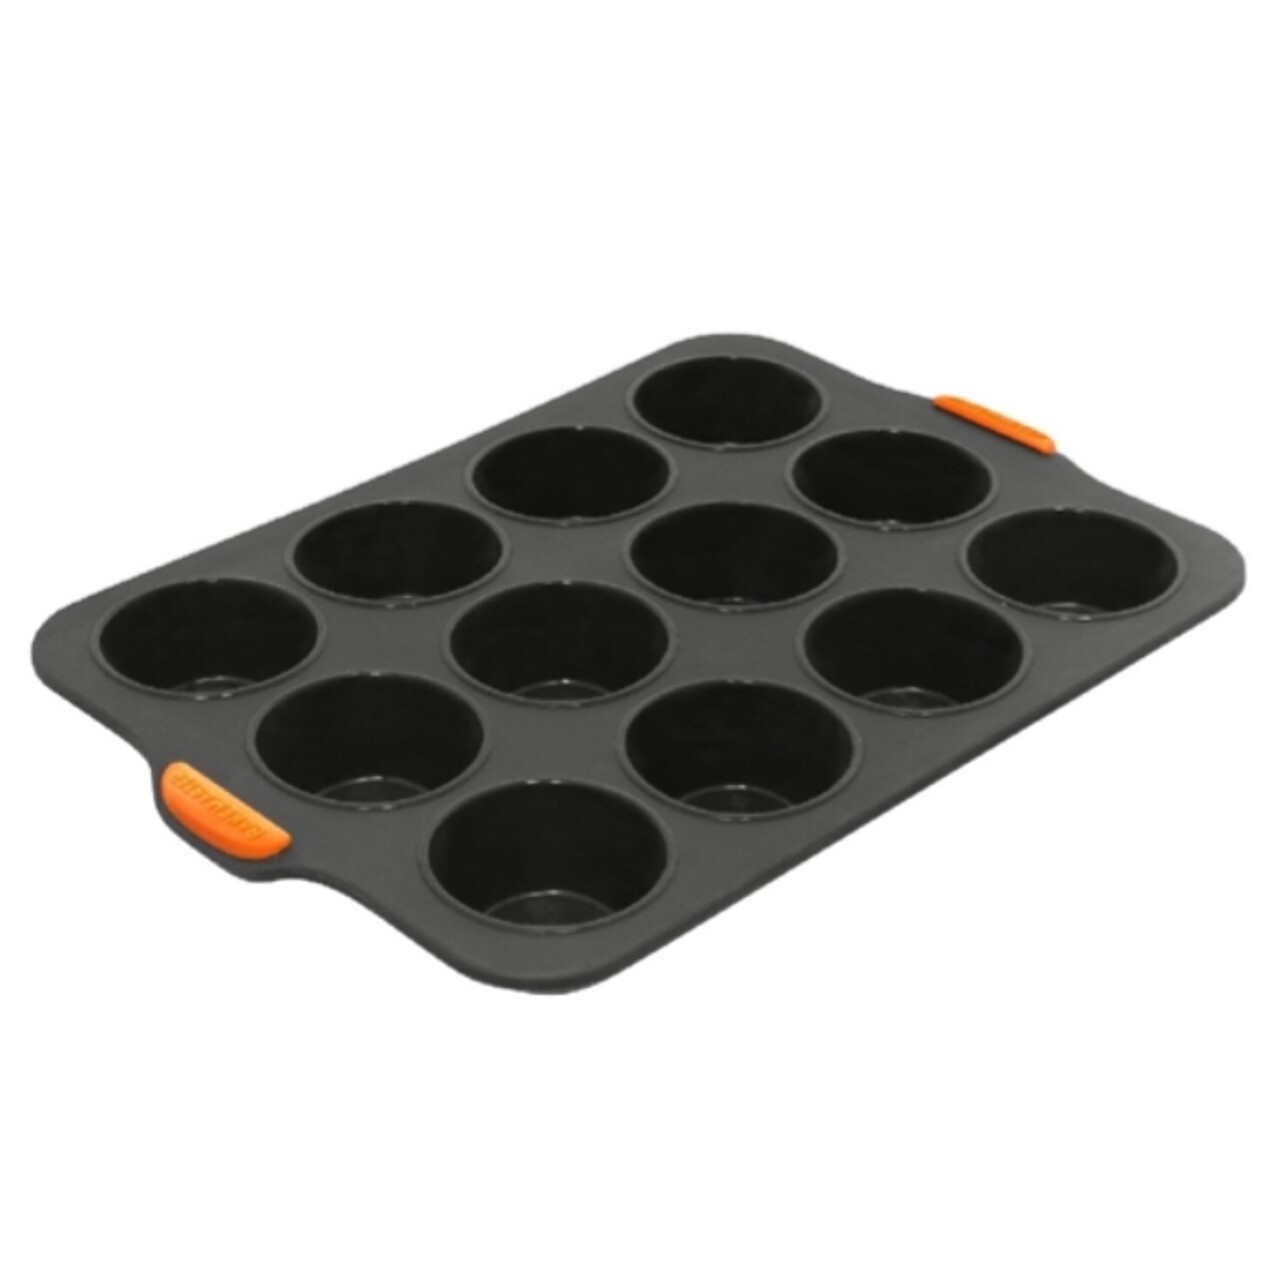 Bakemaster Silicone 12 Cup Muffin Tray